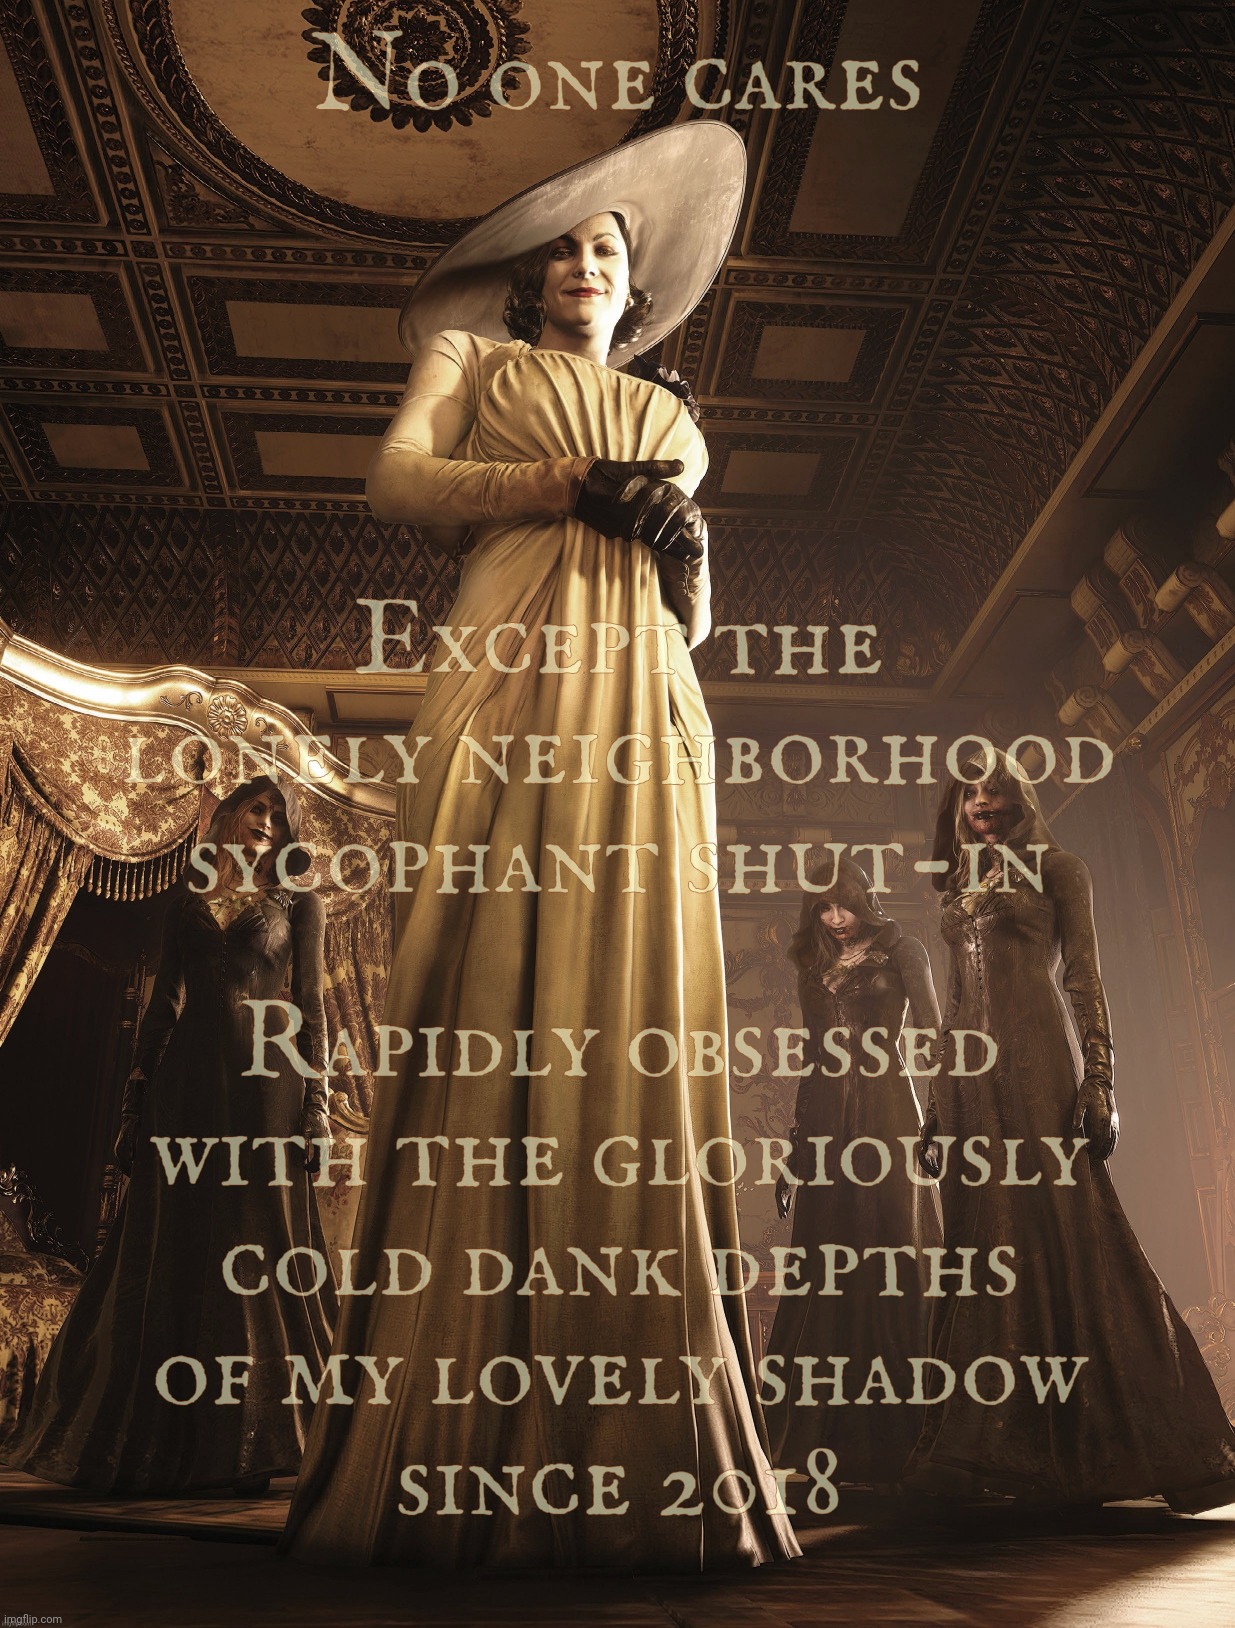 Lady Dimitrescu | No one cares; Except the lonely neighborhood
sycophant shut-in; Rapidly obsessed
with the gloriously
cold dank depths
of my lovely shadow
since 2018 | image tagged in lady dimitrescu | made w/ Imgflip meme maker